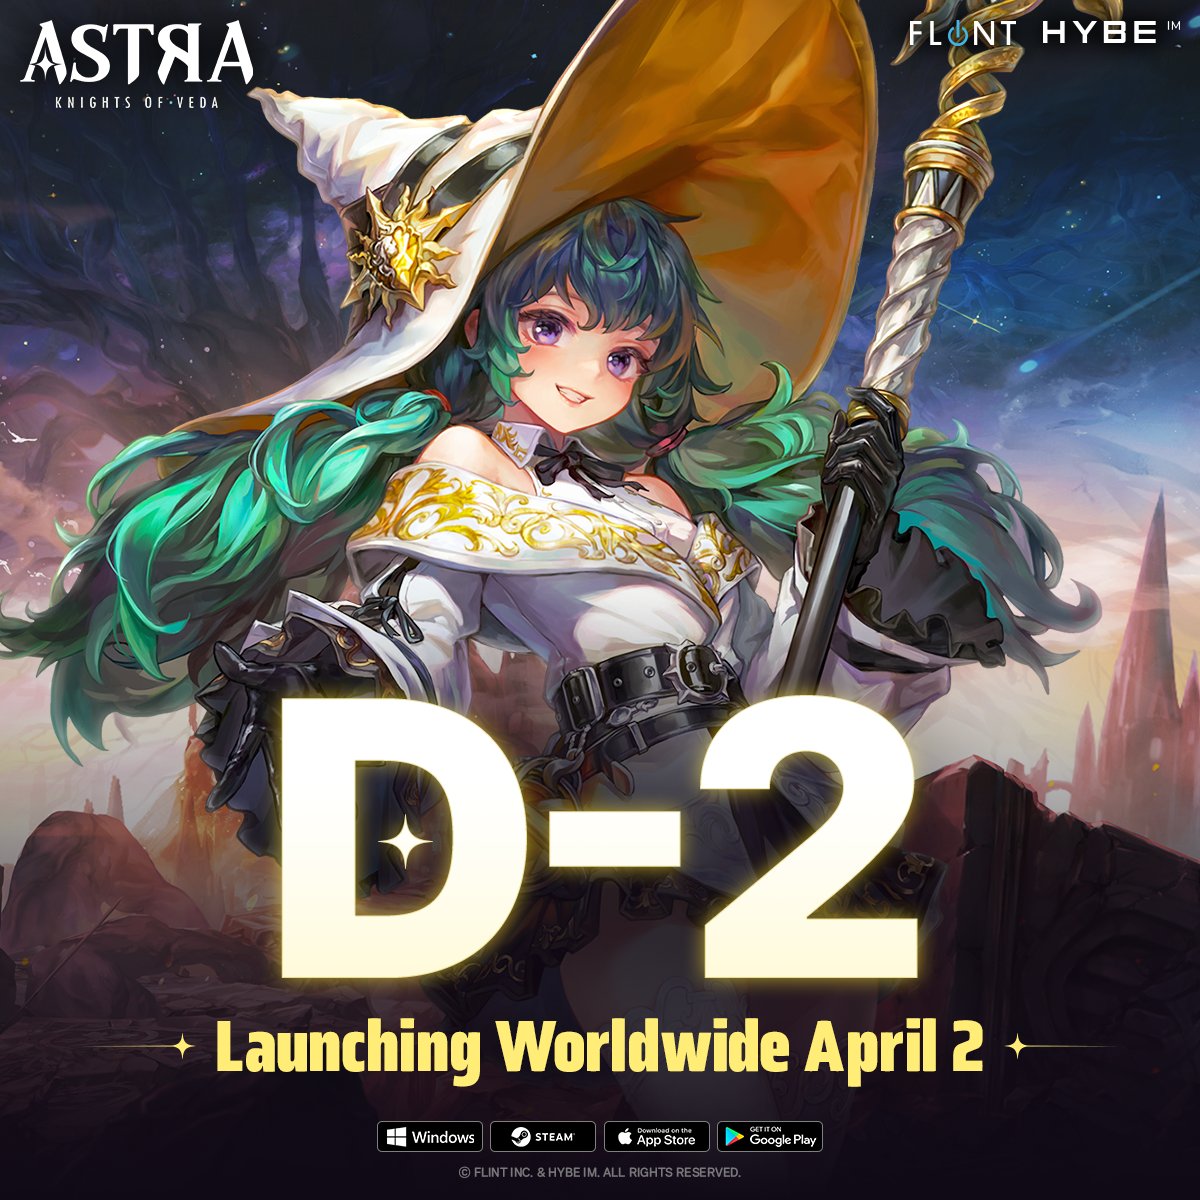 🎊 The wait is almost over 🎊

Just 2 more days until the launch of ASTRA: Knights of Veda!

#ASTRA #KnightsofVeda #OfficialLaunch #2daysleft